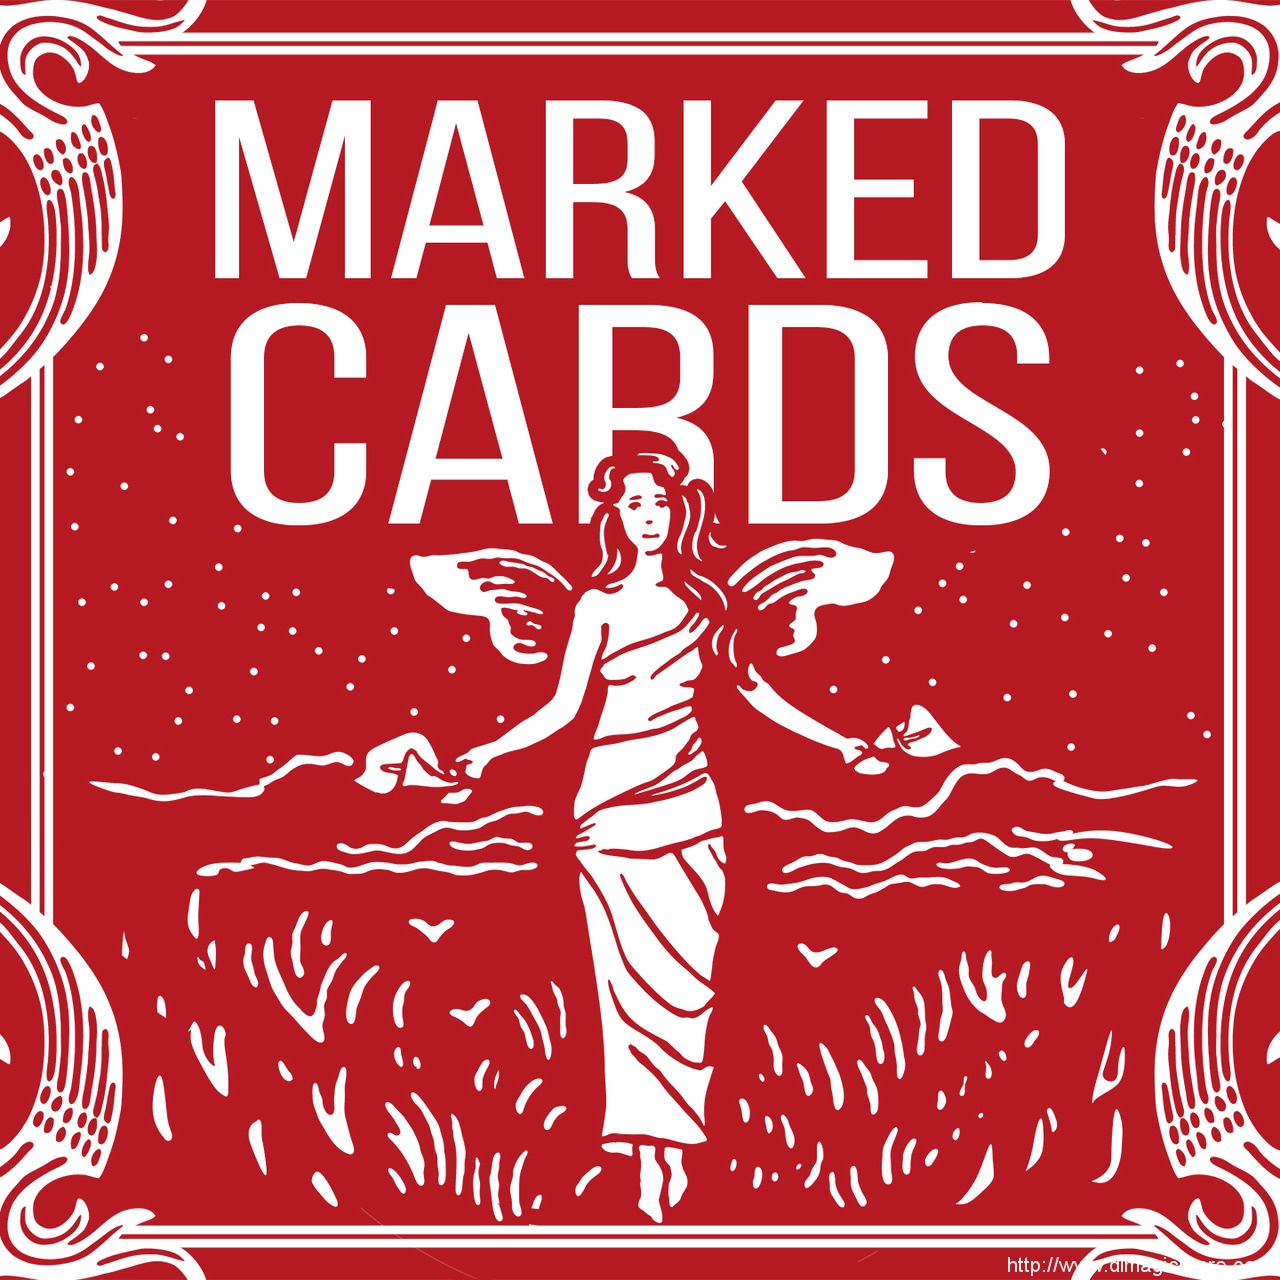 Marked Cards by Rick Lax (Penguin magic)